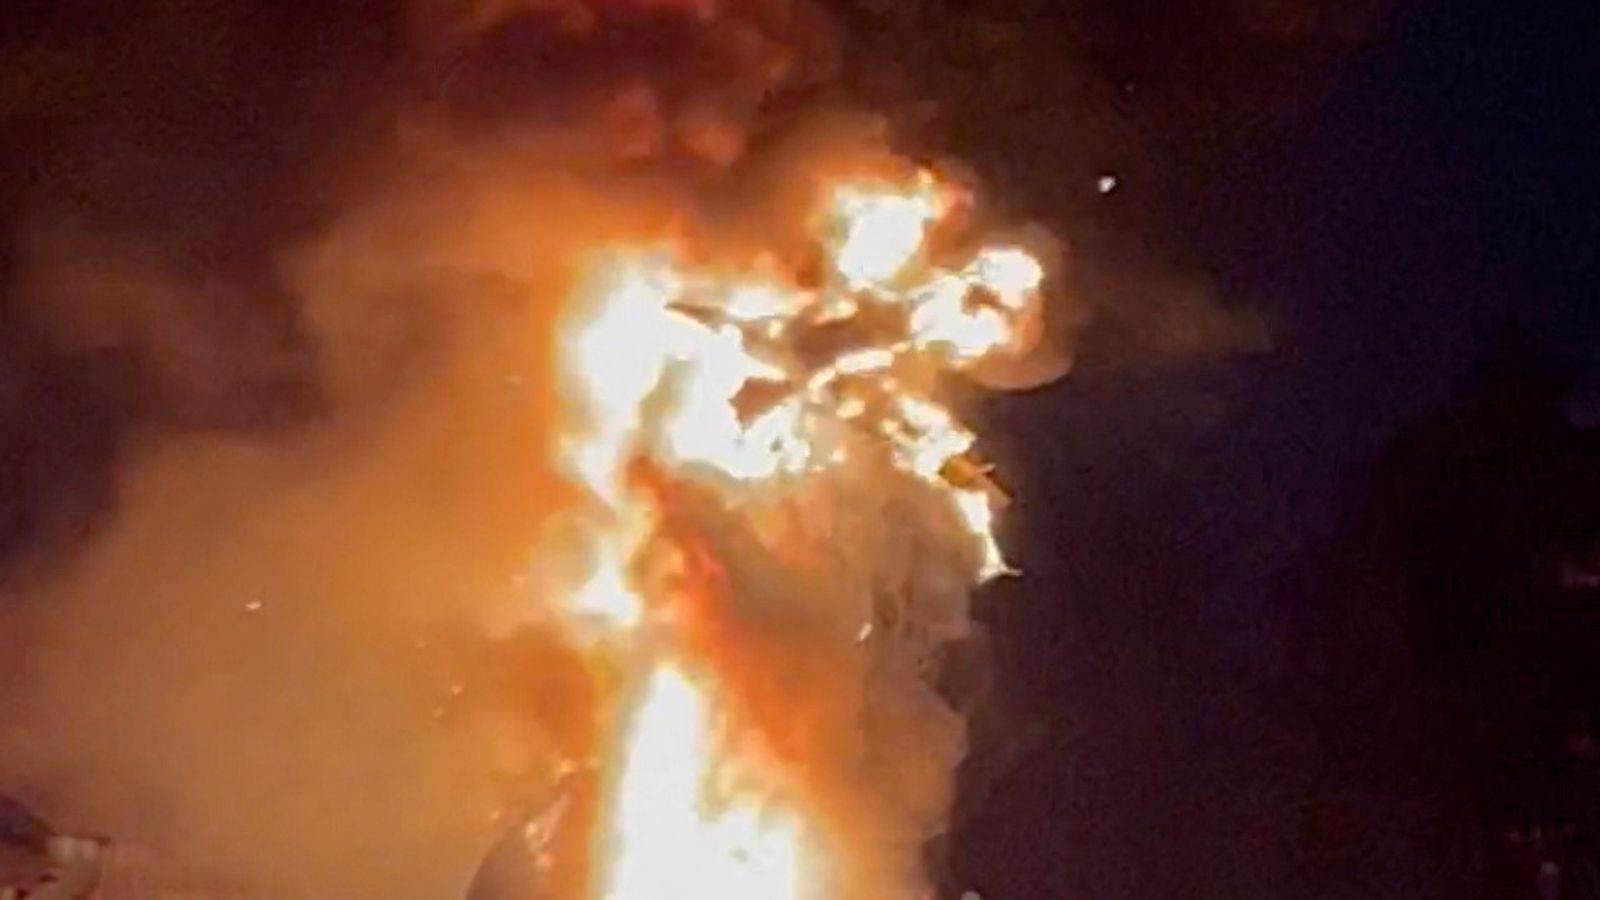 Disneyland firebreathing dragon engulfed by flames during live